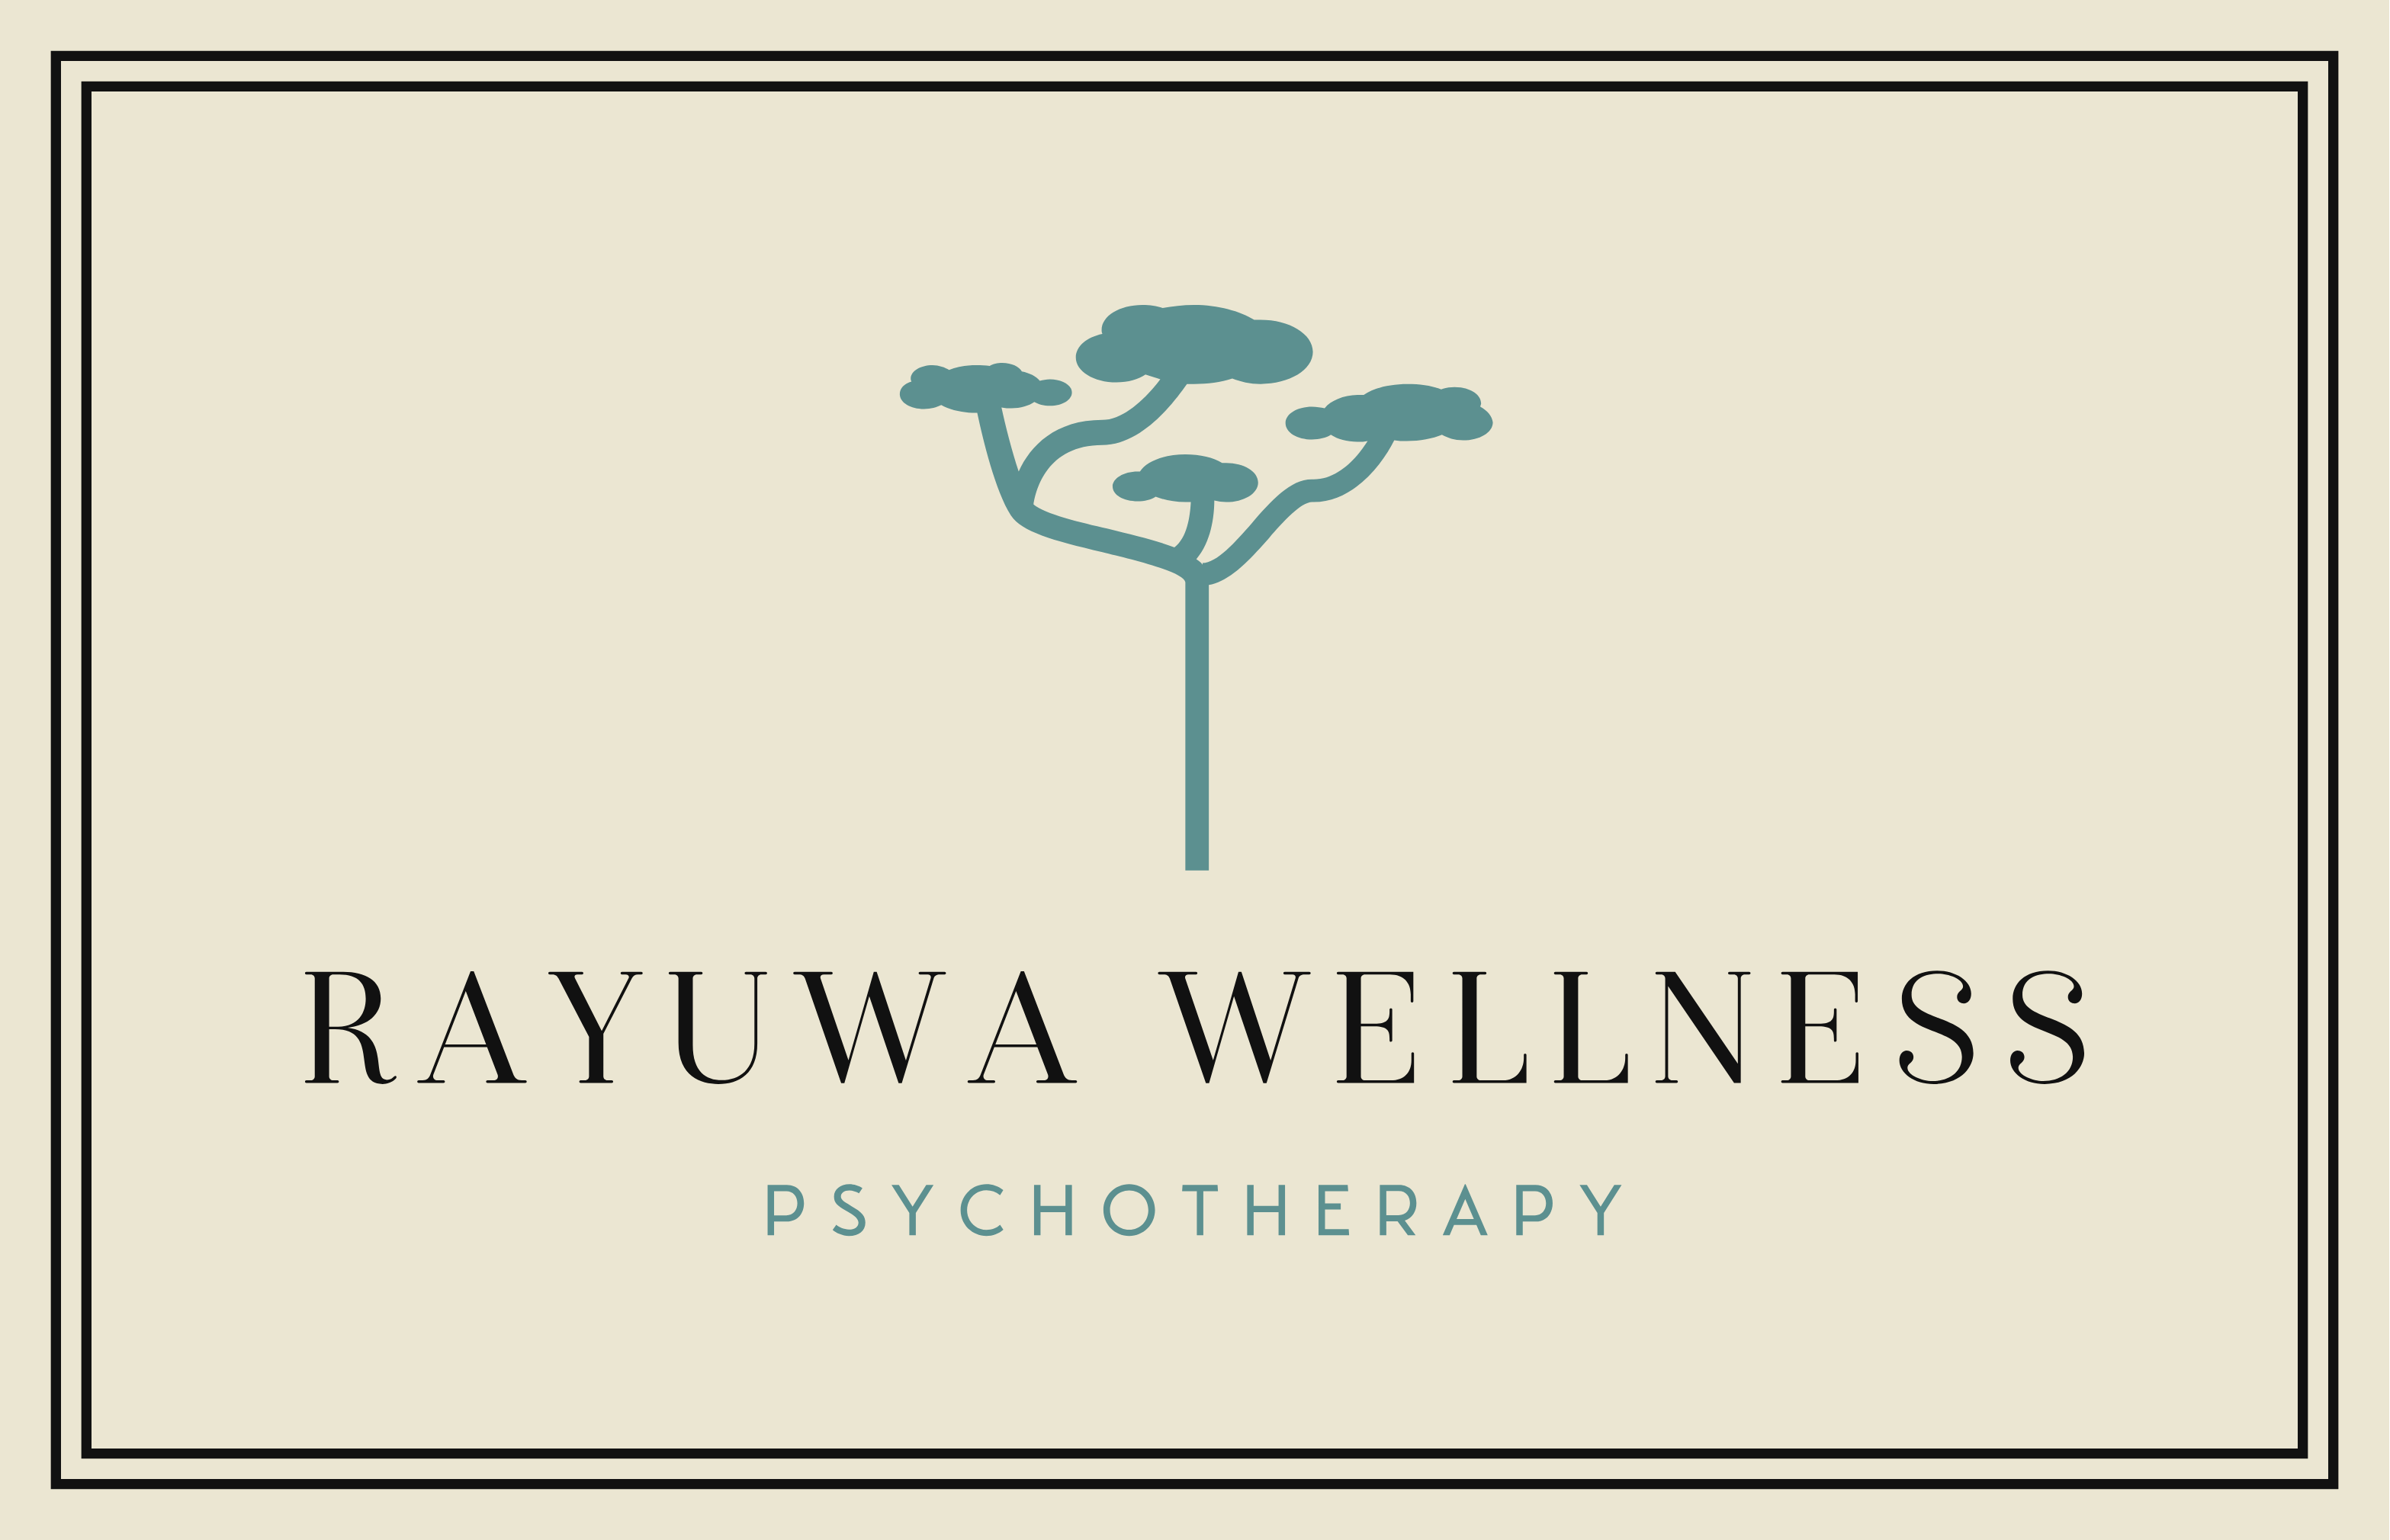 This logo is for Rayuwa Wellness Psychotherapy. It is a horizontal rectangle with a tan background and a slim black border offset. The words Rayuwa Wellness appear in all caps and black font. Under that, the word psychotherapy is shown in all caps, and smaller green font. Above the text is an image of a tree in green.